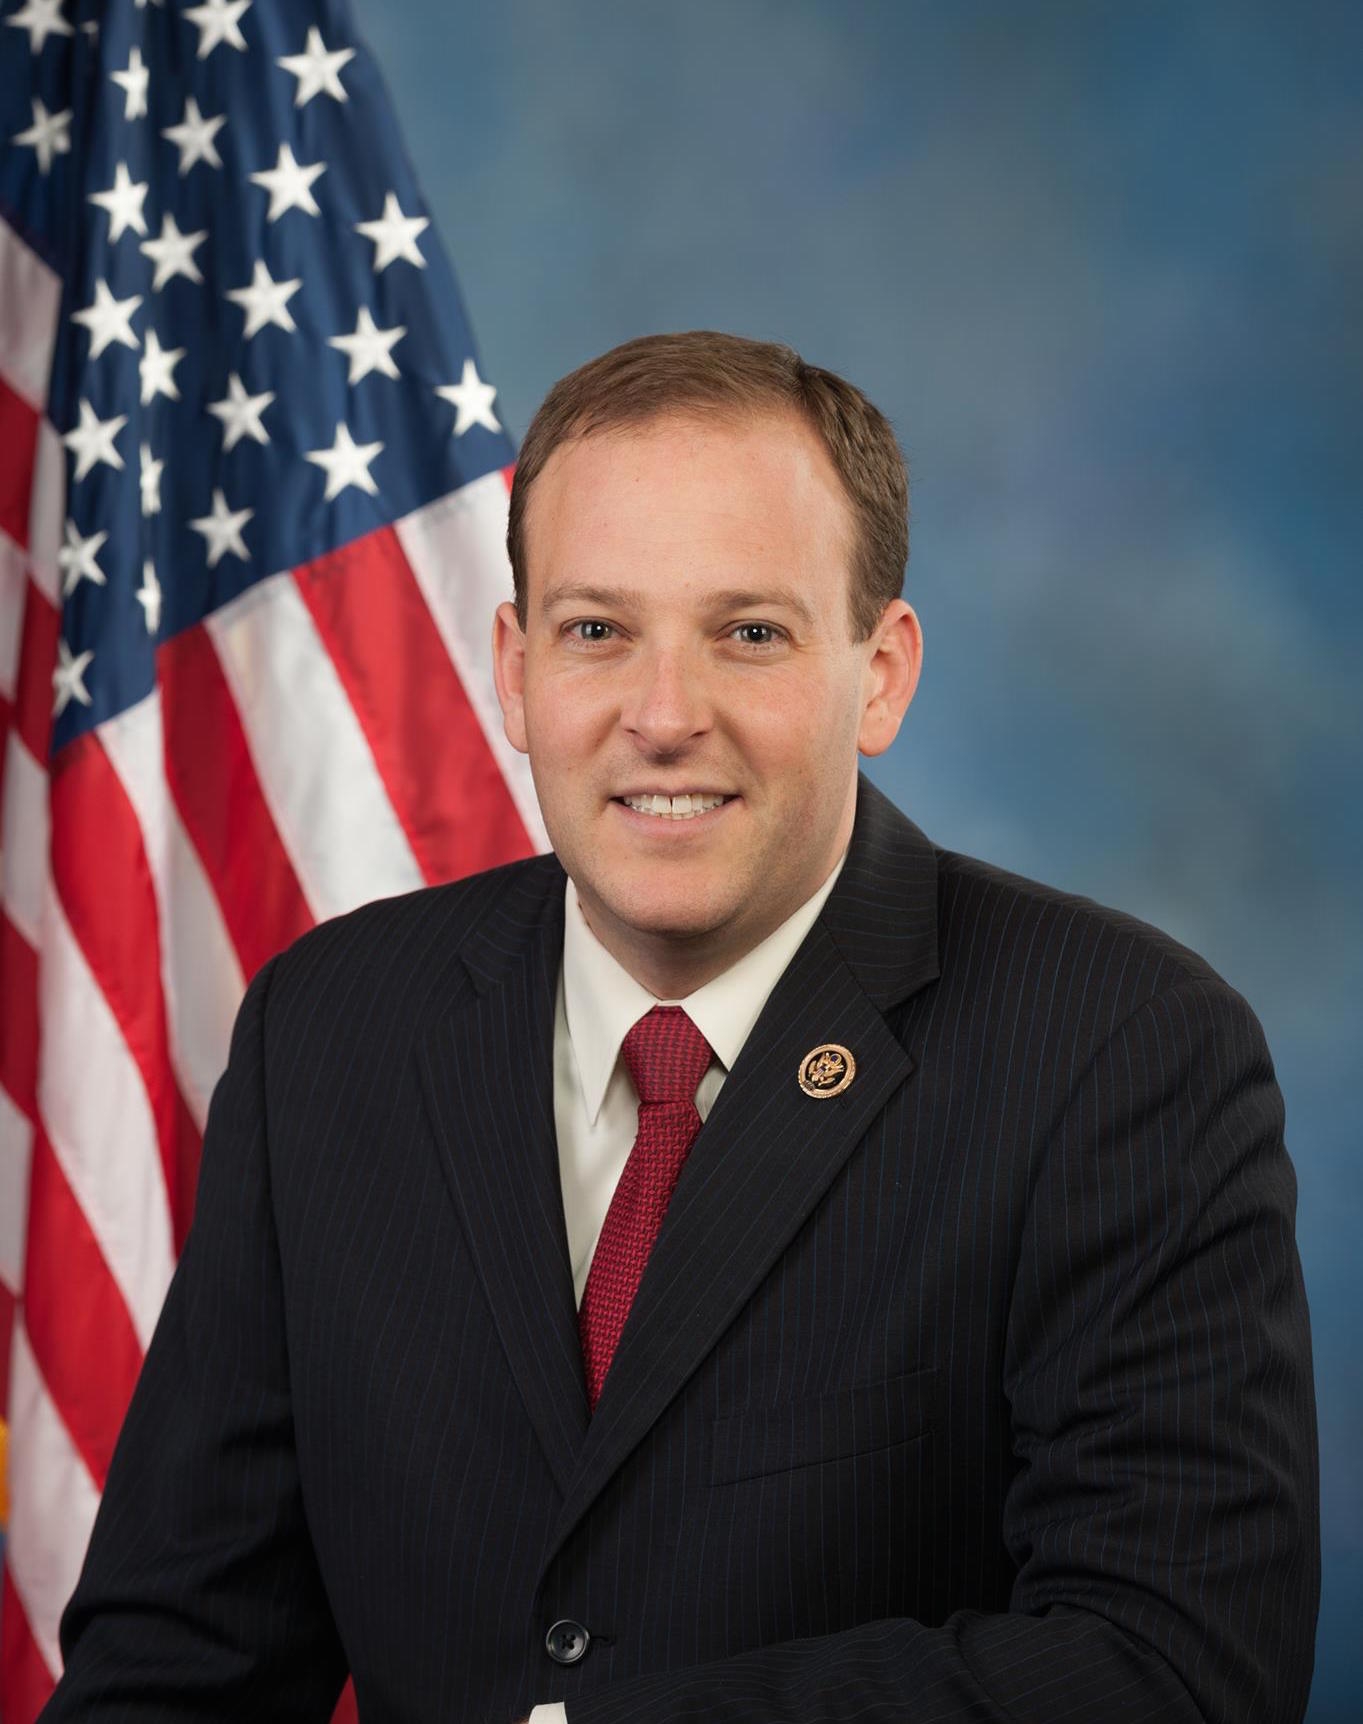 Rep. Lee Zeldin (R-N.Y.) represents New York's first congressional district. (Wikimedia Commons)